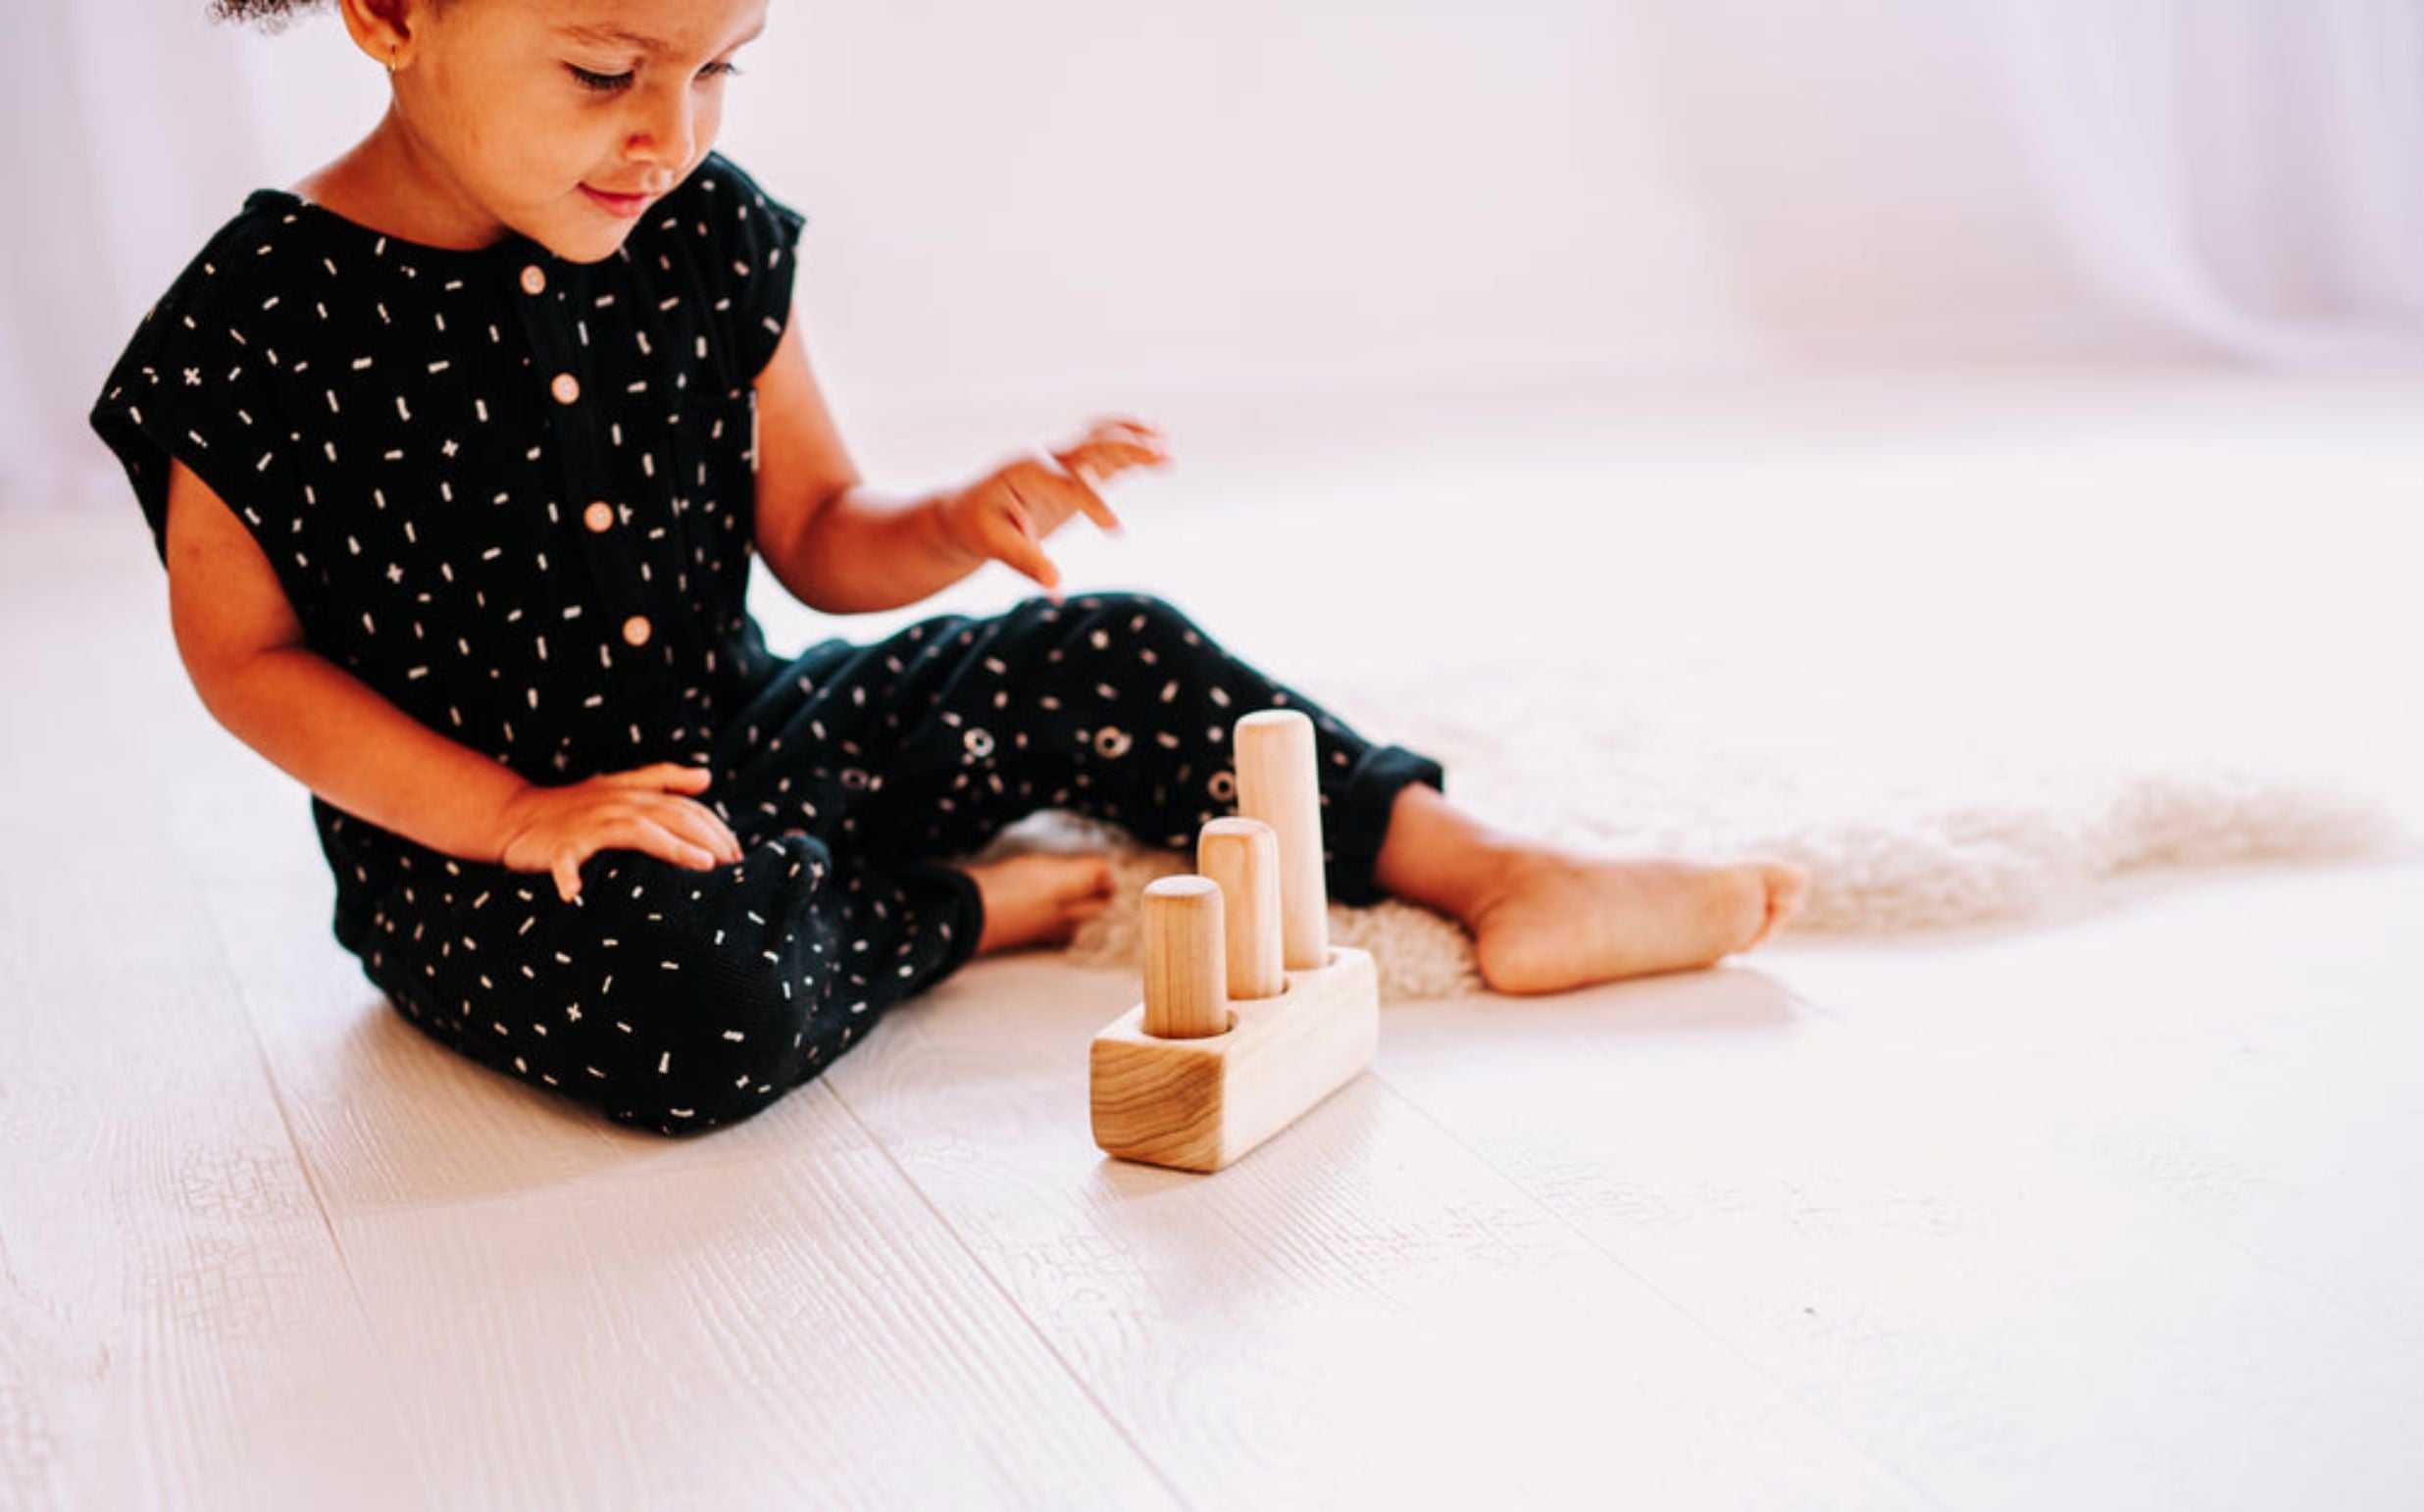 Toddler girl sits on the floor playing with the wooden Peg Puzzle Toy by Clover & Birch.